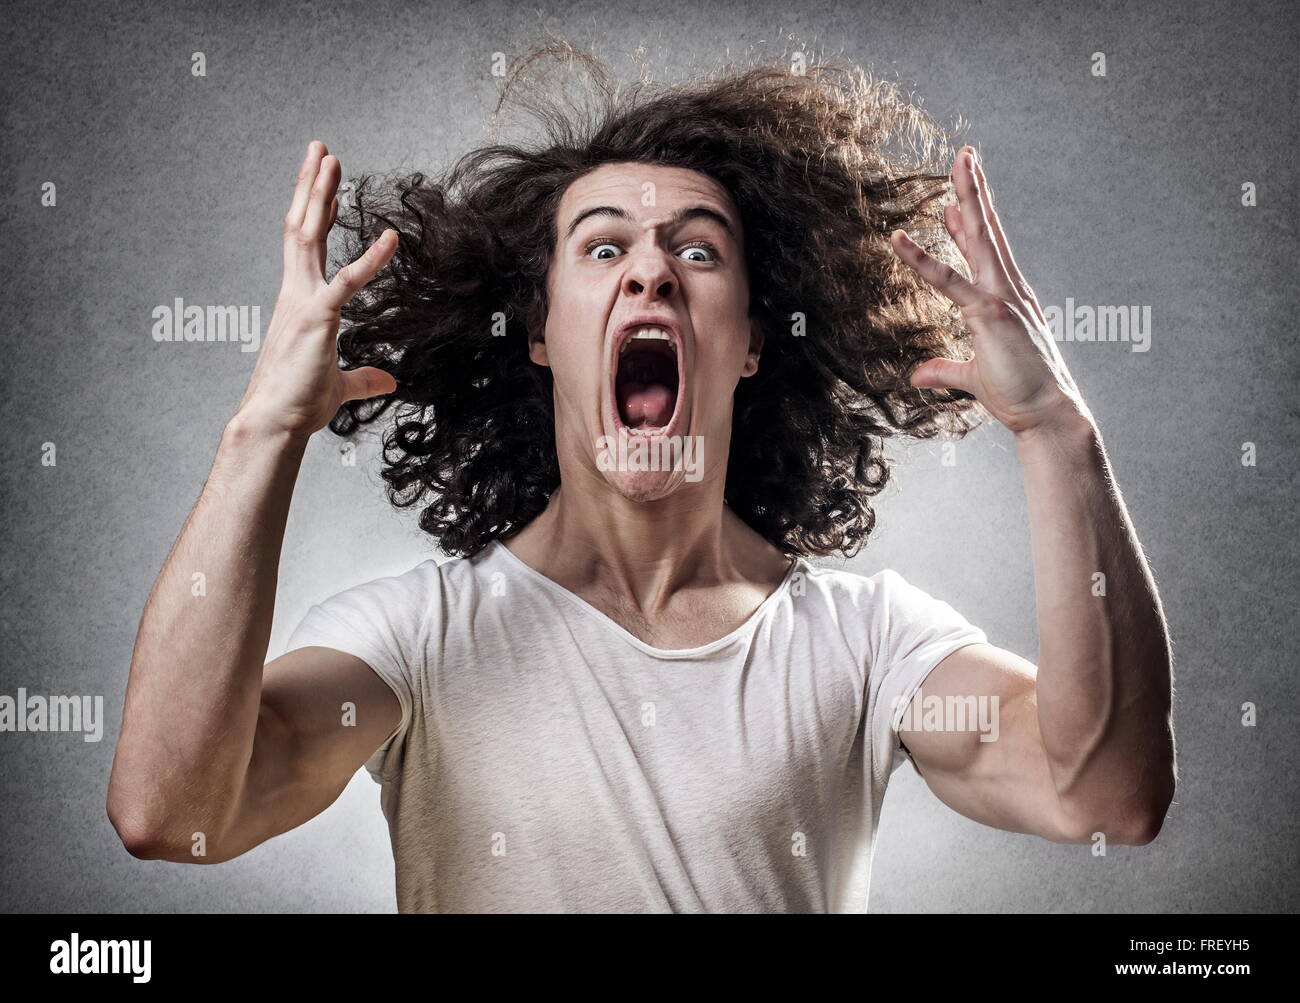 Young guy facing a mental collapse with a desperate expression Stock Photo